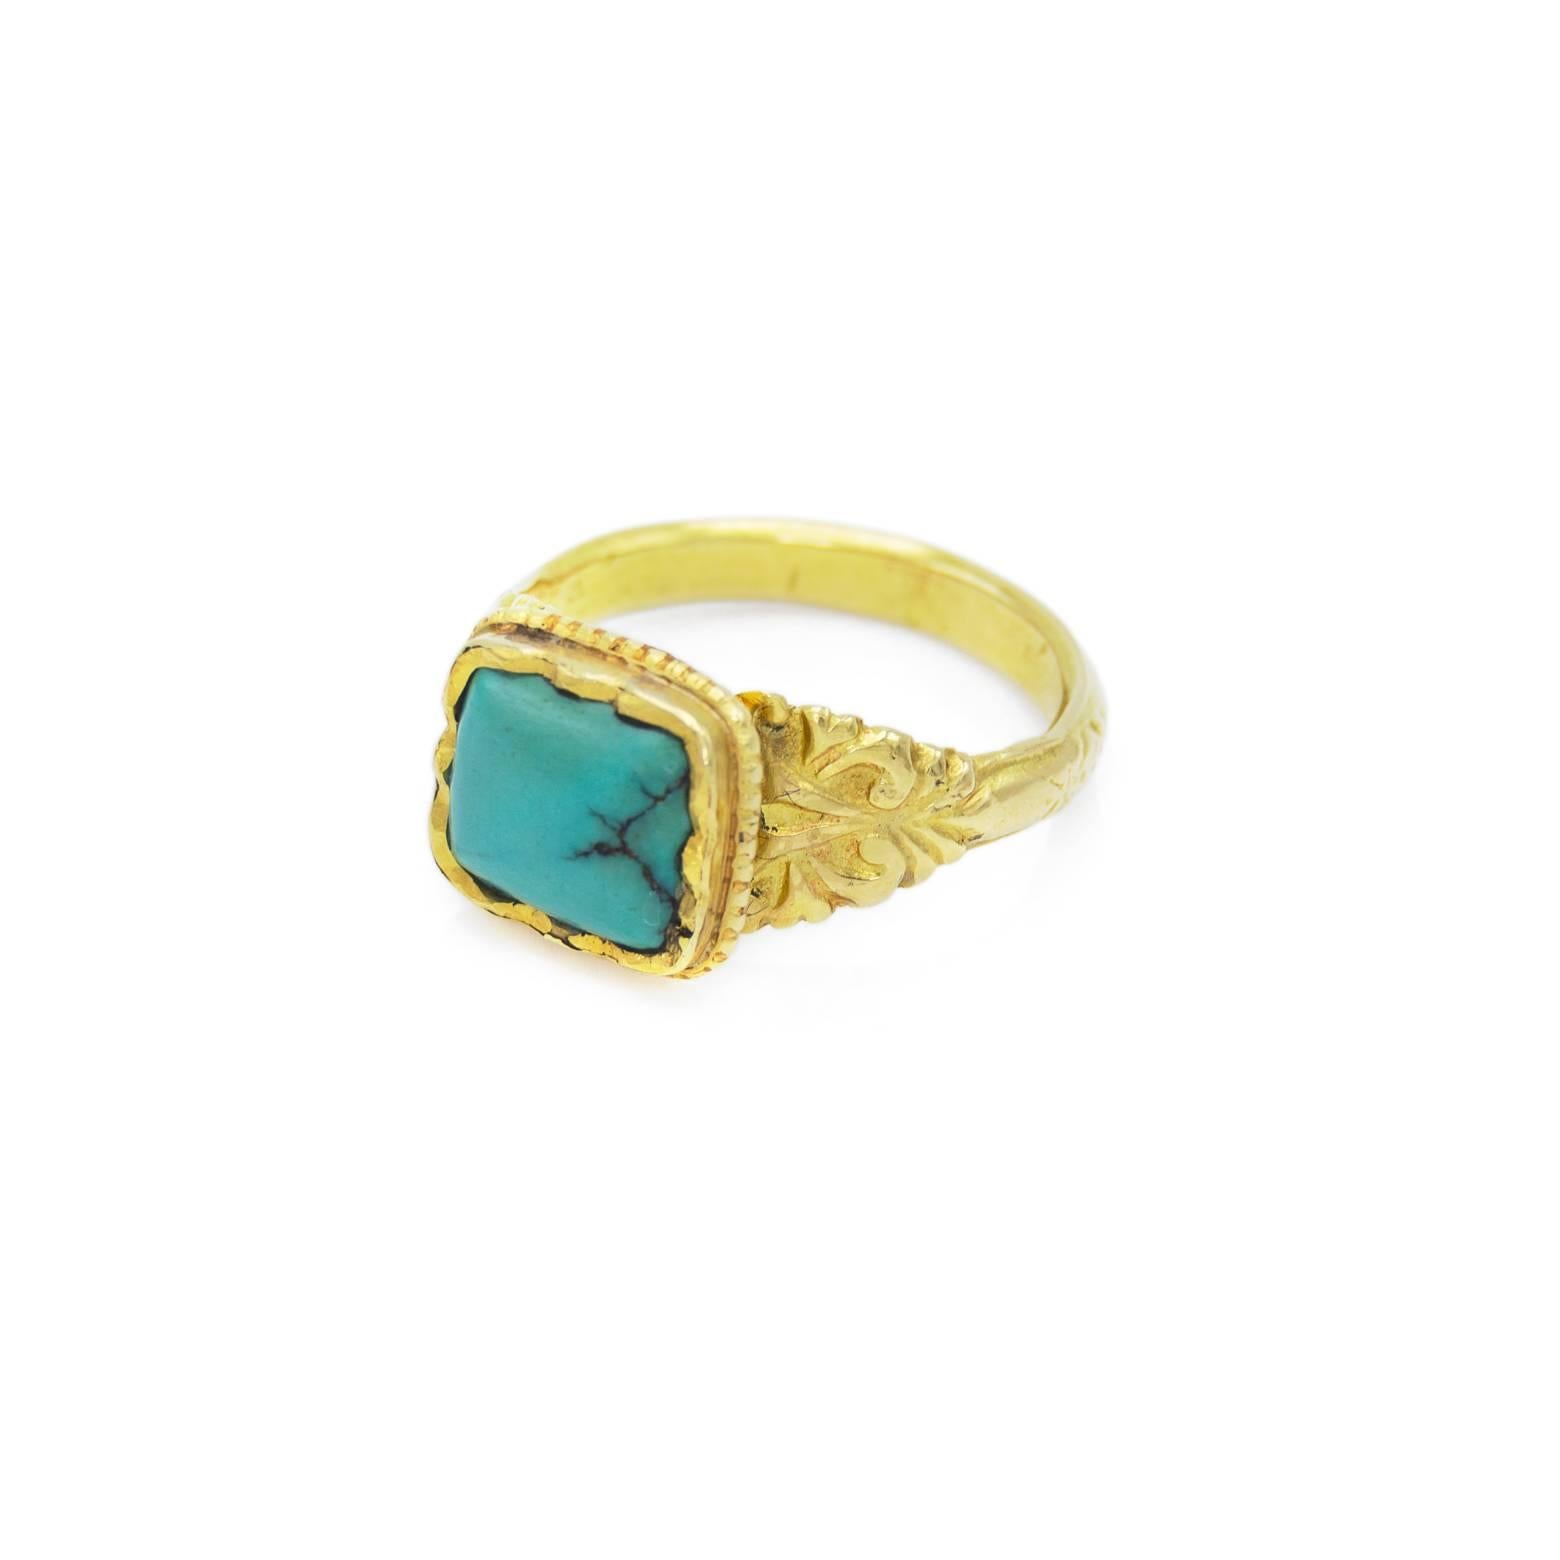 Turquoise and gold are a luxurious combination and this ring speaks luxury but is understated. The green blue hue of the turquoise speaks of ancient camel treks across the Sahara......Size 7 3/4. Perfect for a stylish gentlemen or sophisticated